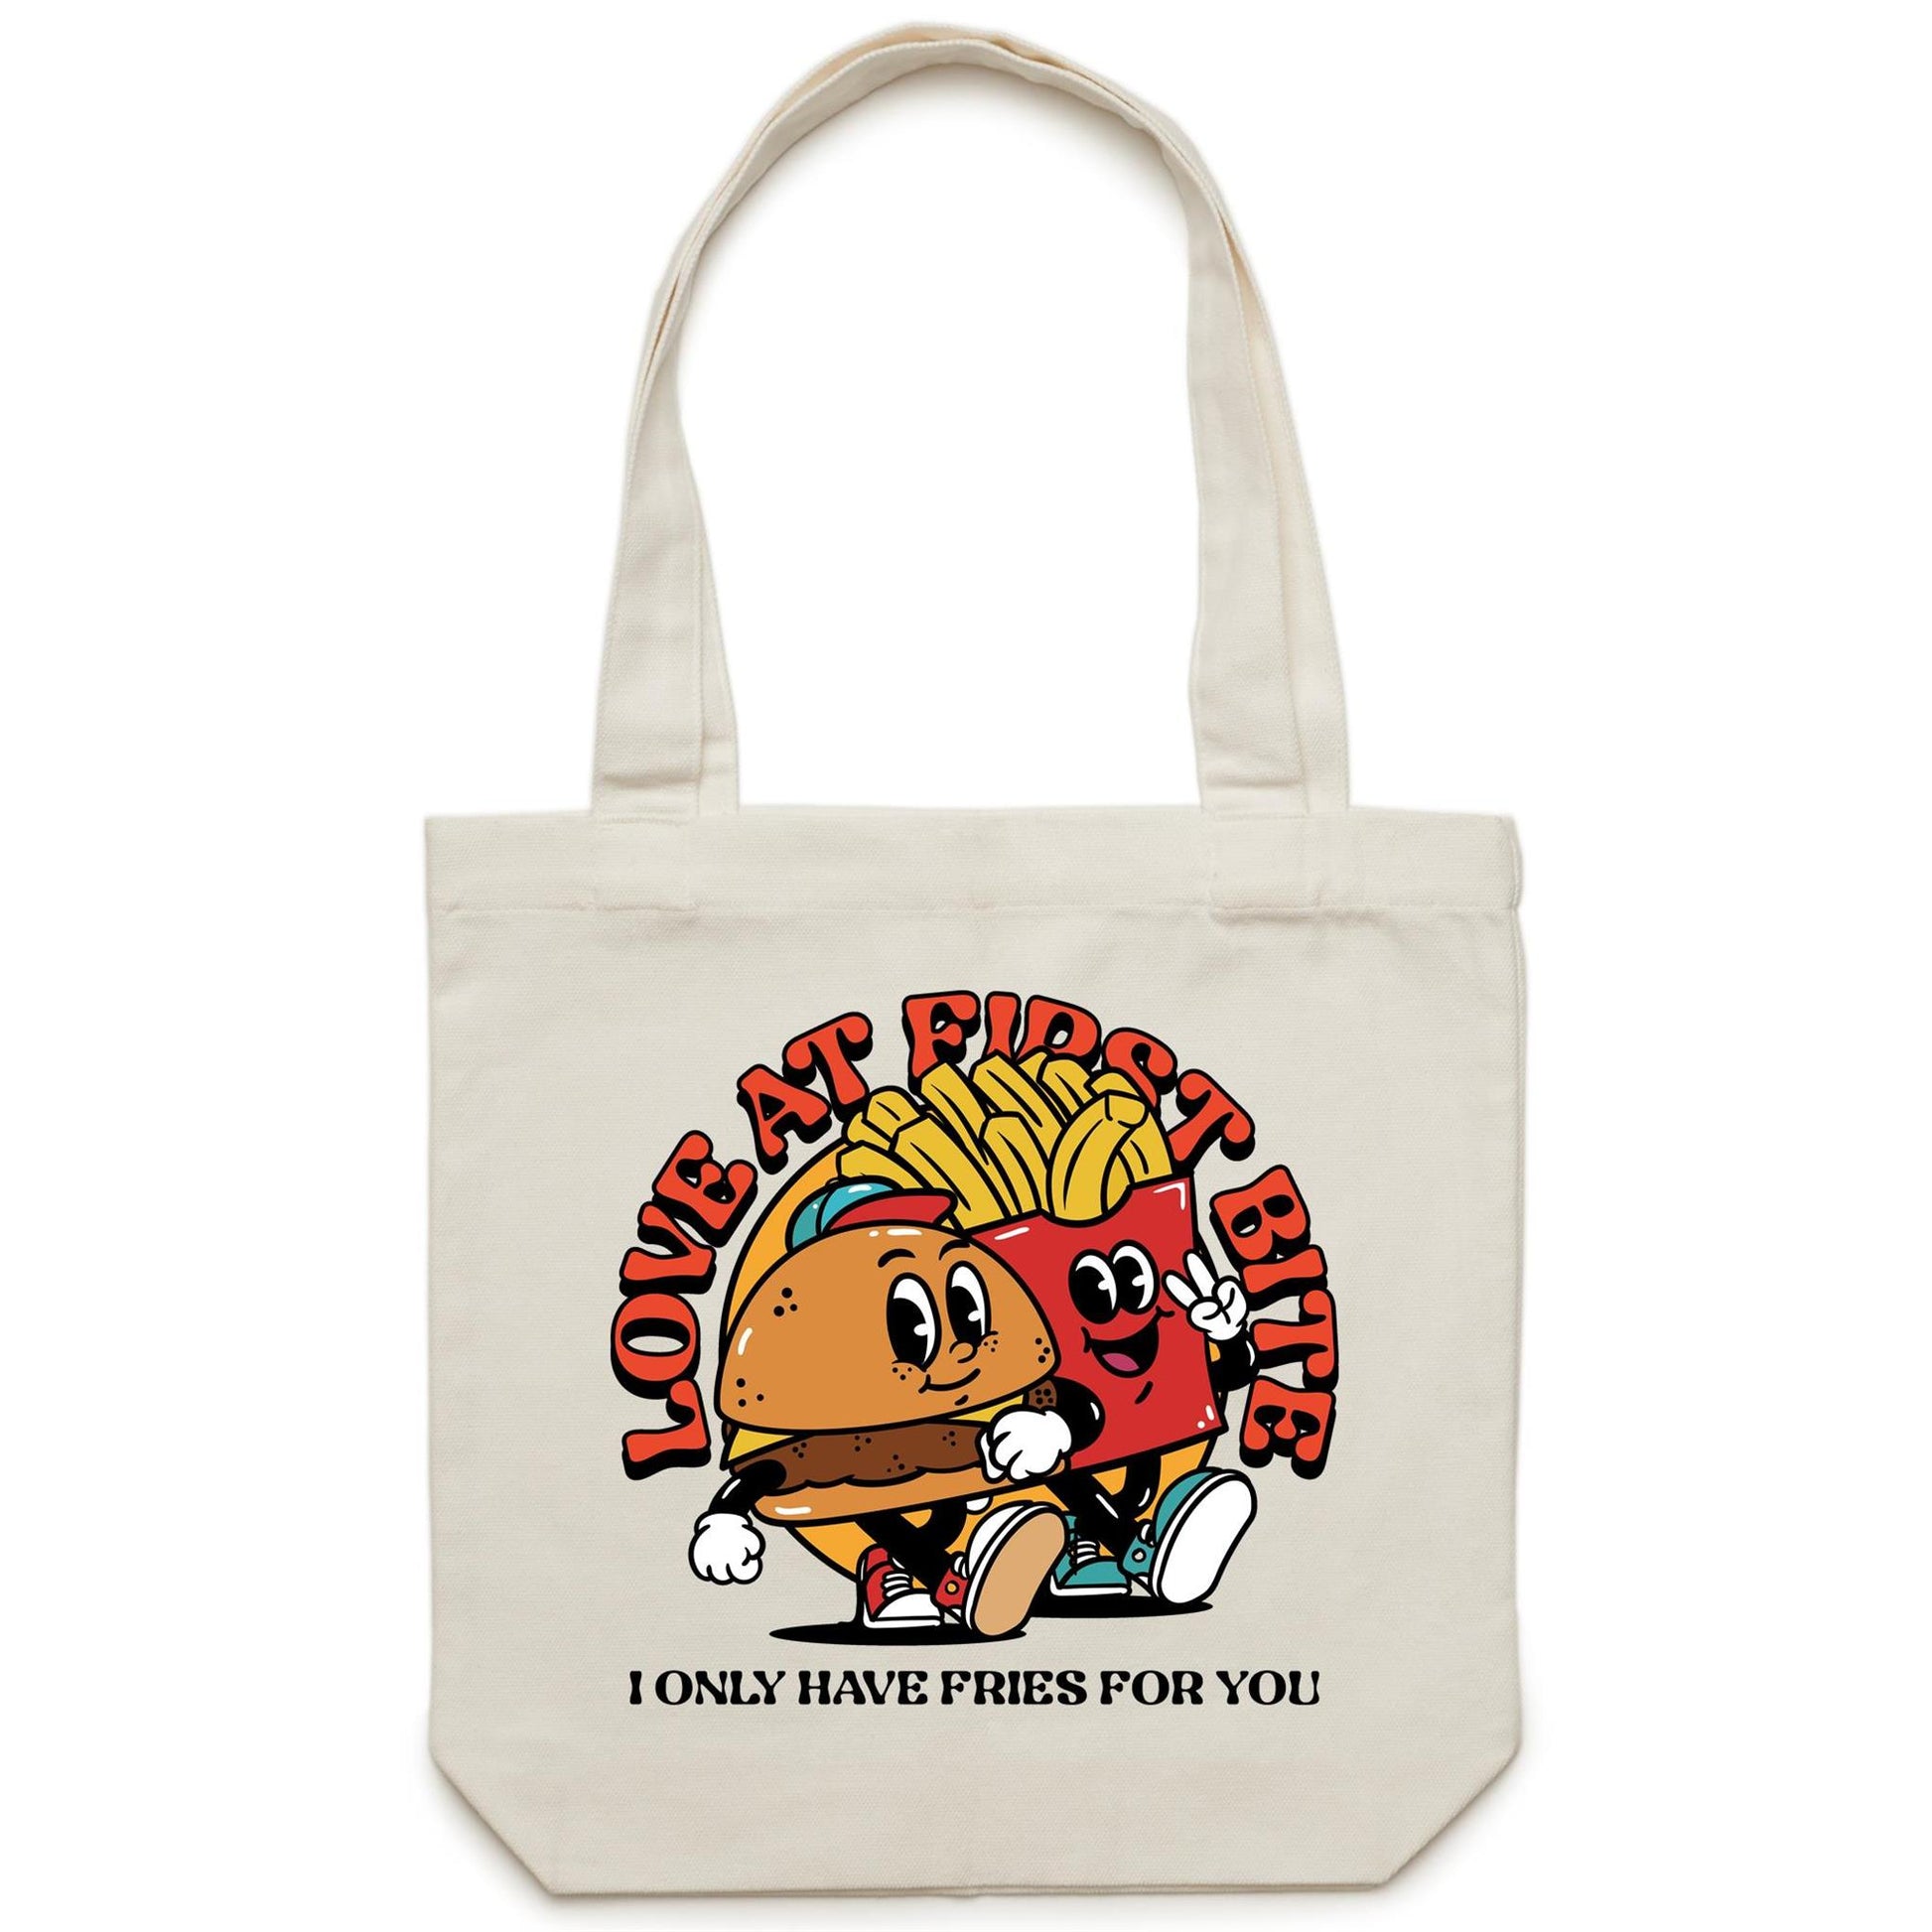 Love At First Bite, Burger And Fries - Canvas Tote Bag Default Title Tote Bag Food Retro